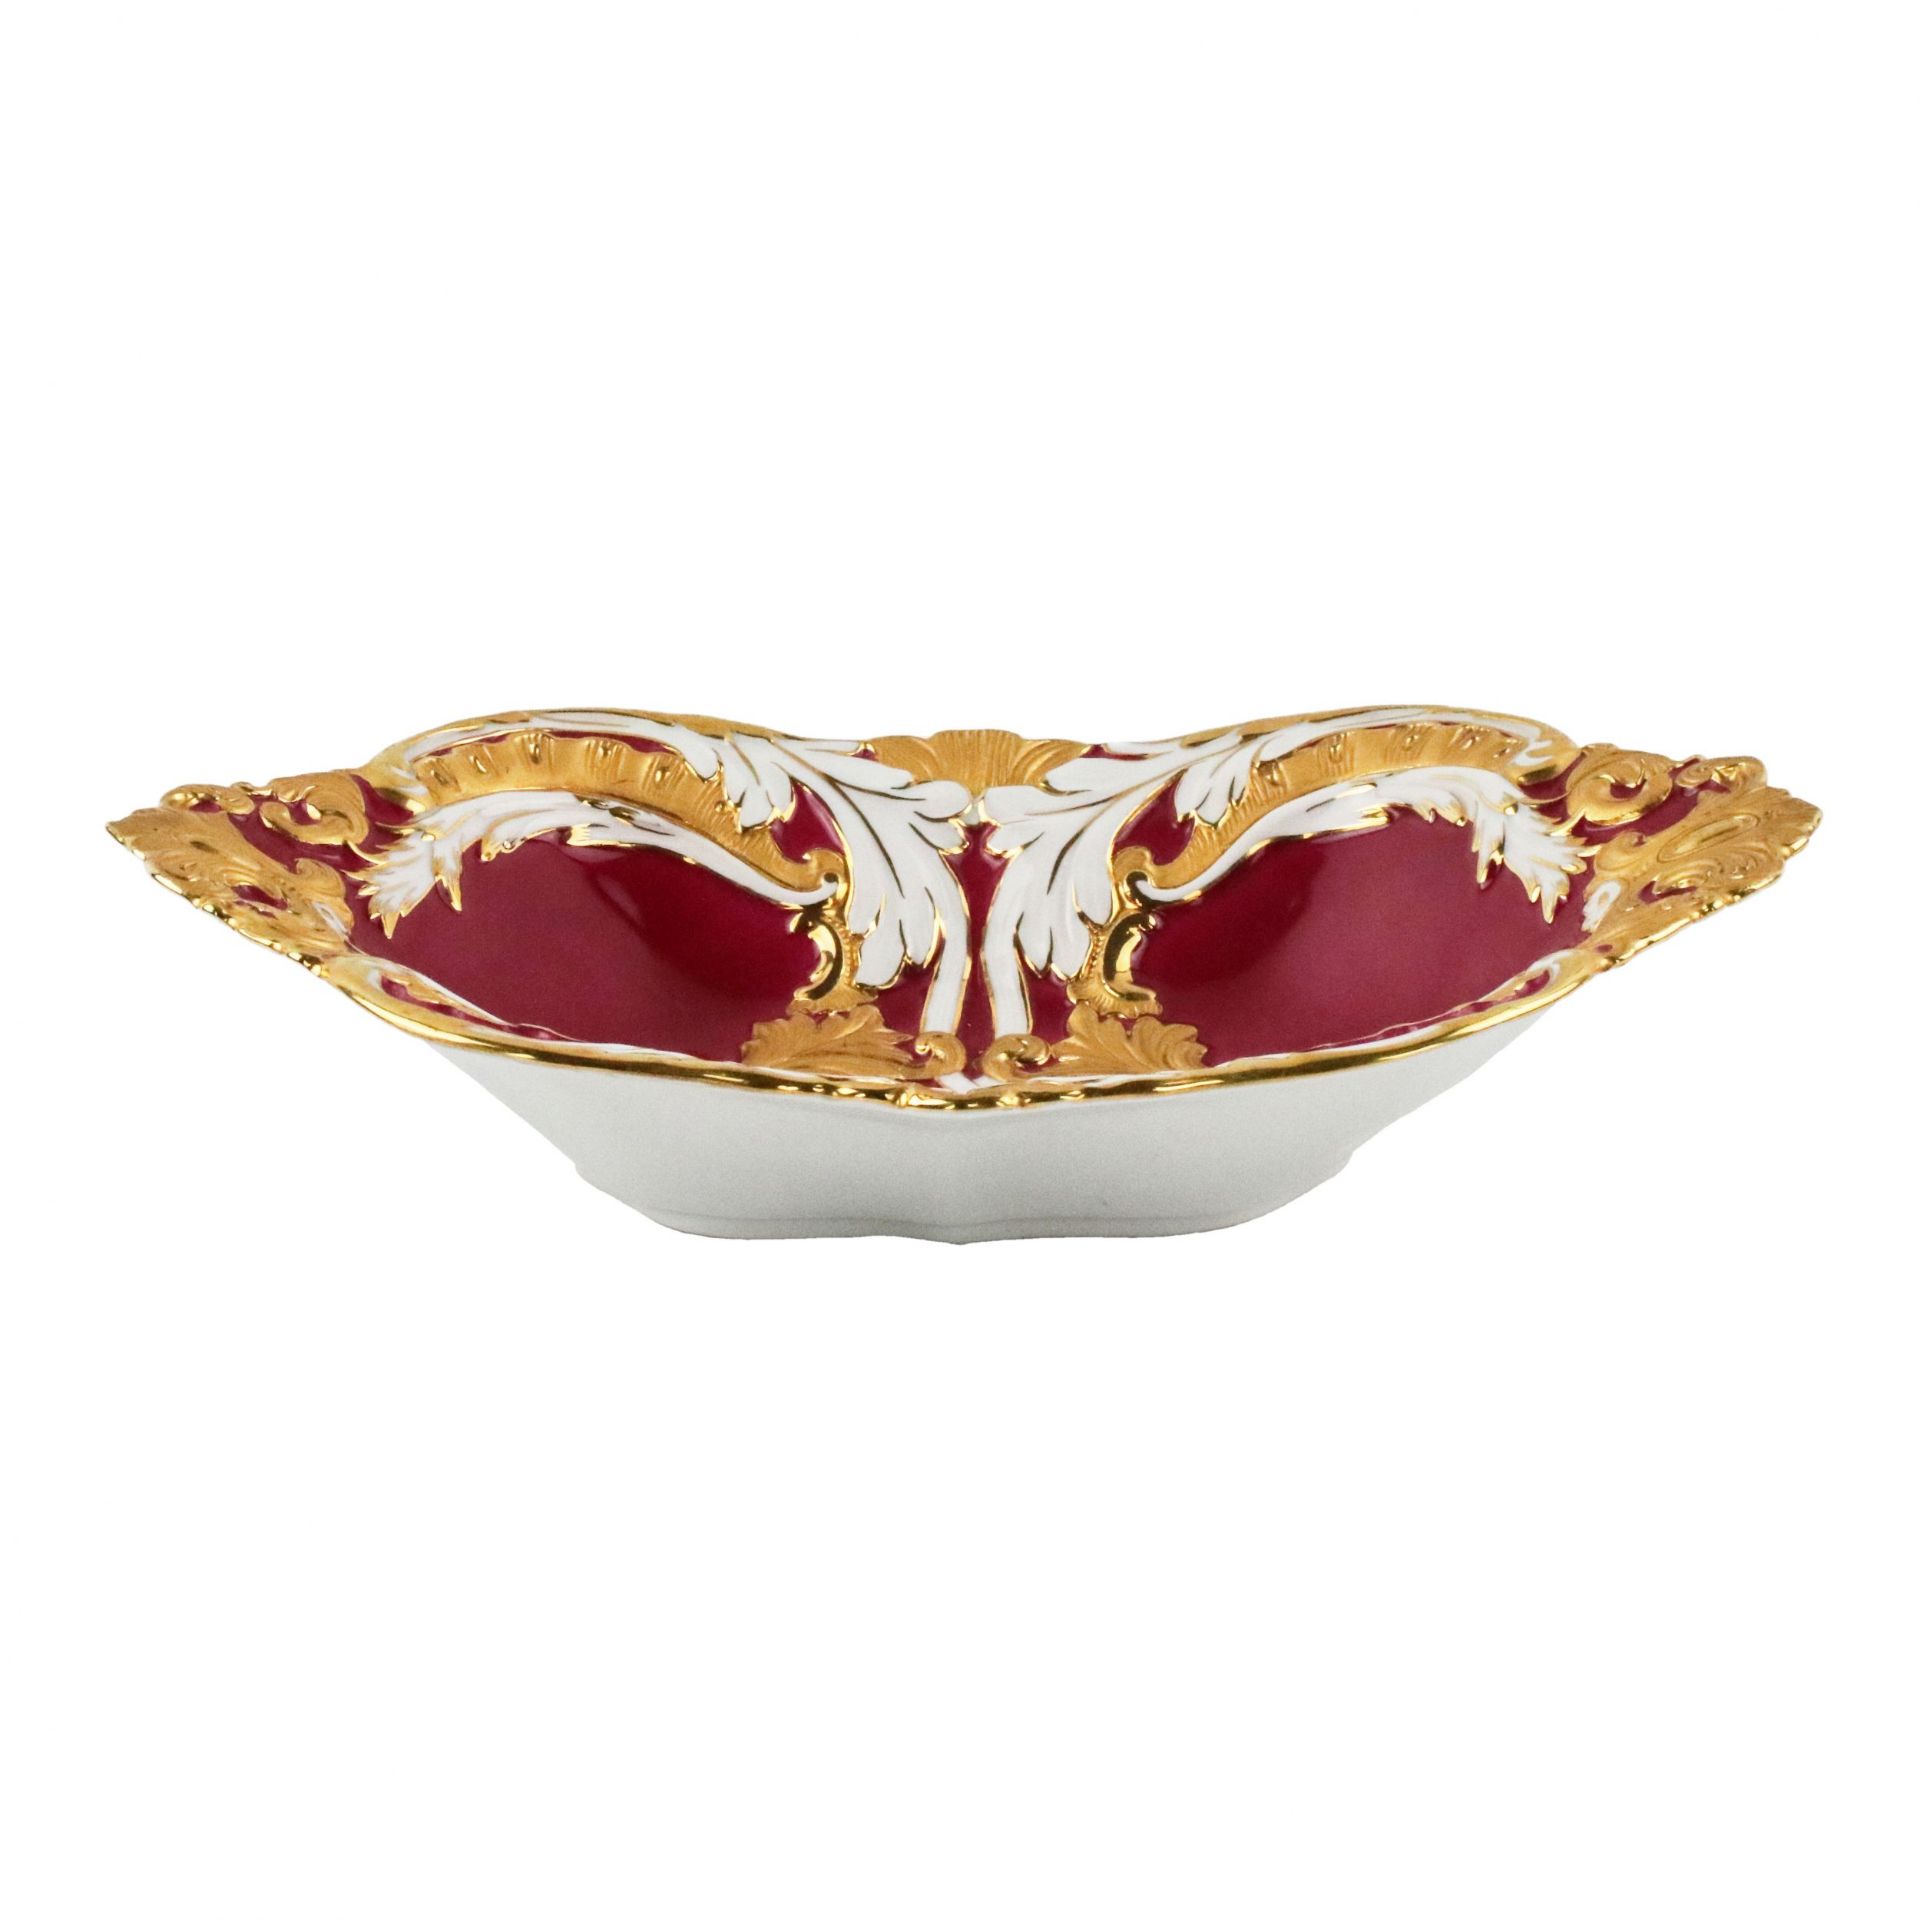 Meissen manufactory biscuit dish. 20th century. - Image 2 of 5